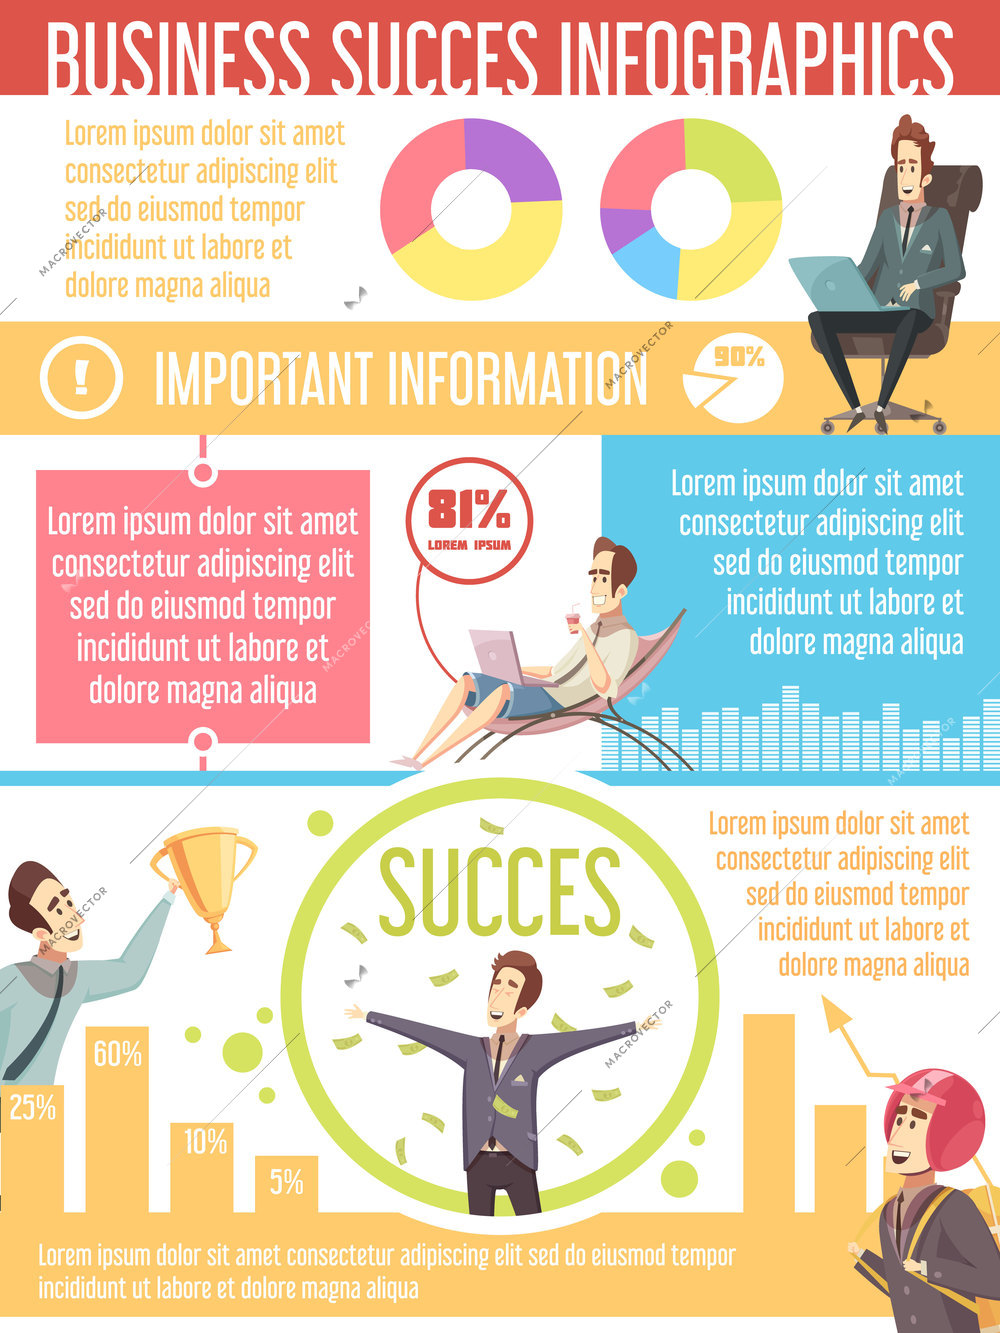 Effective tips for successful business retro cartoon infographic poster with circle diagrams and money rain vector illustration